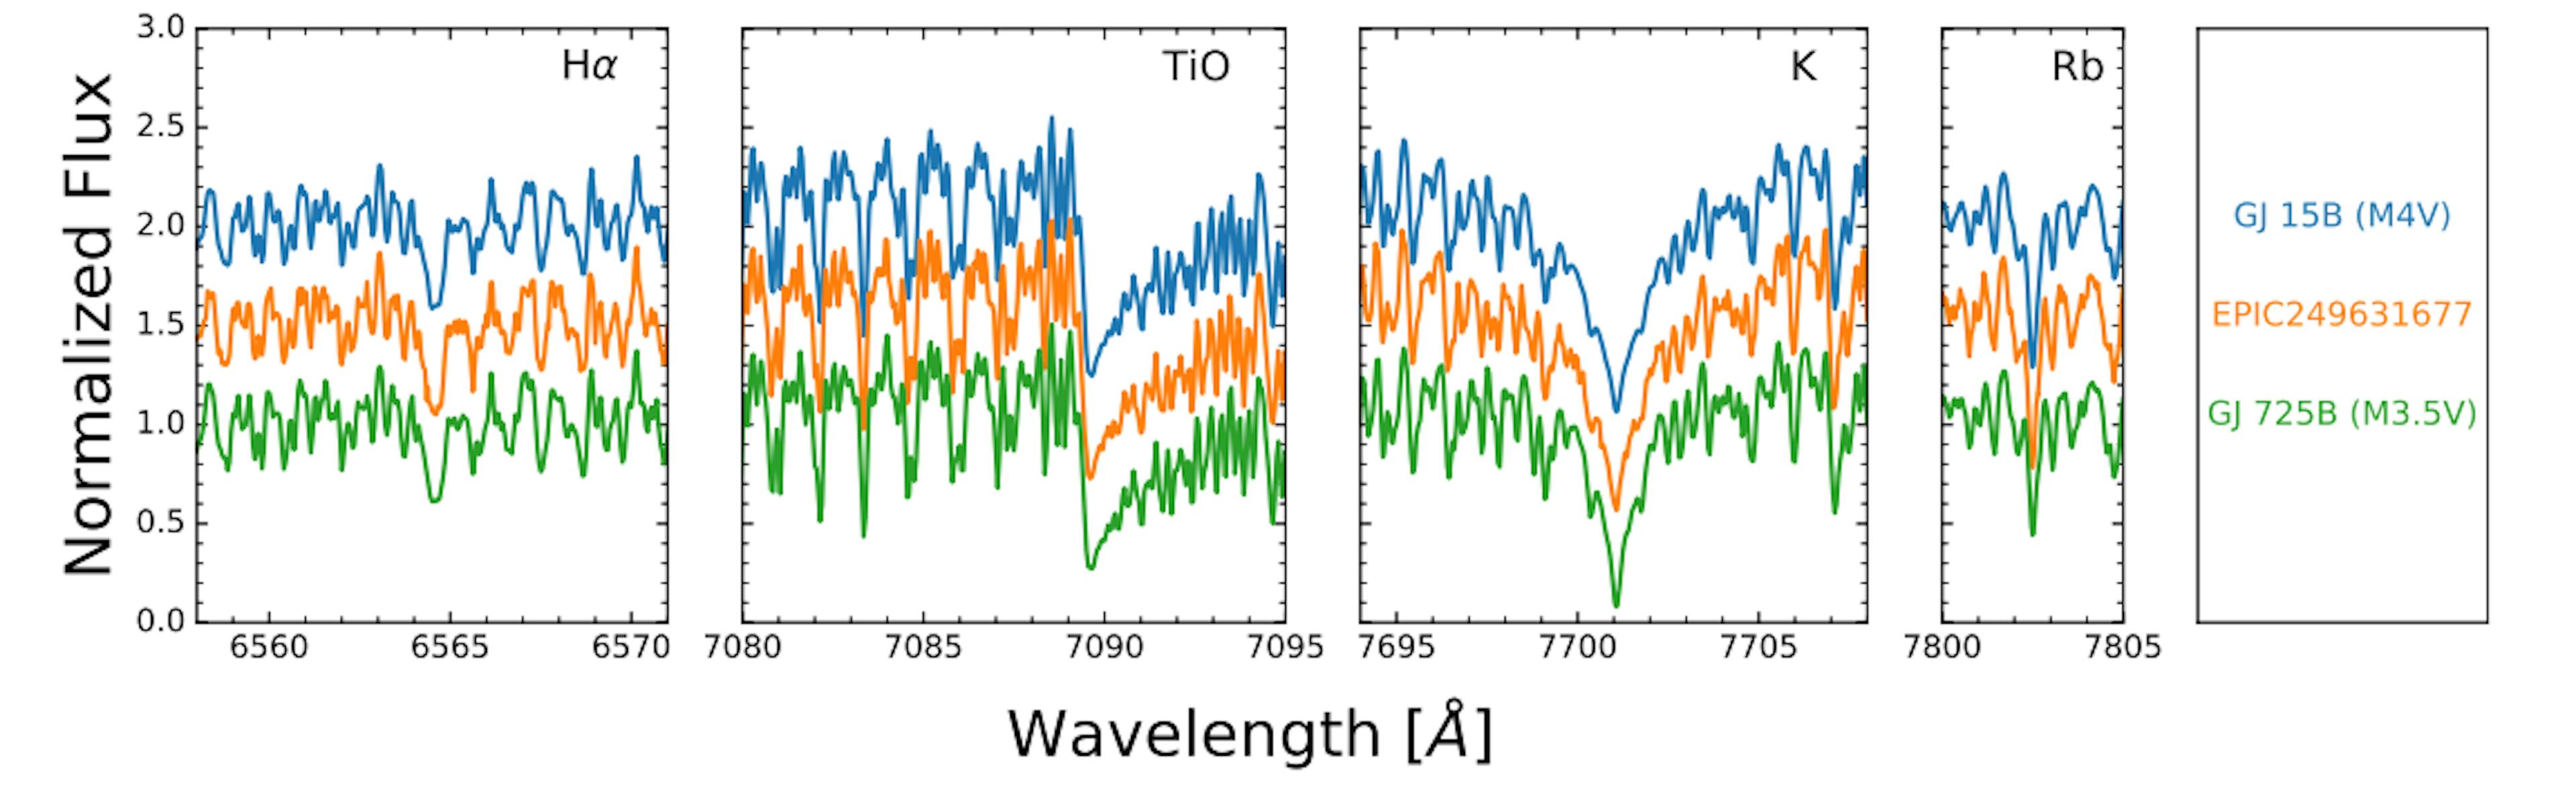 Figure 4. Comparison of Keck/HIRES spectra of EPIC 249631677 (orange) with GJ 725B (green) and GJ 15B (blue) in thevicinity of the expected locations of Hα, TiO bands, K I (7701.0˚A), and Rb I (7802.4˚A). No secondary spectral lines, emission lines, or rotational broadening are detected.